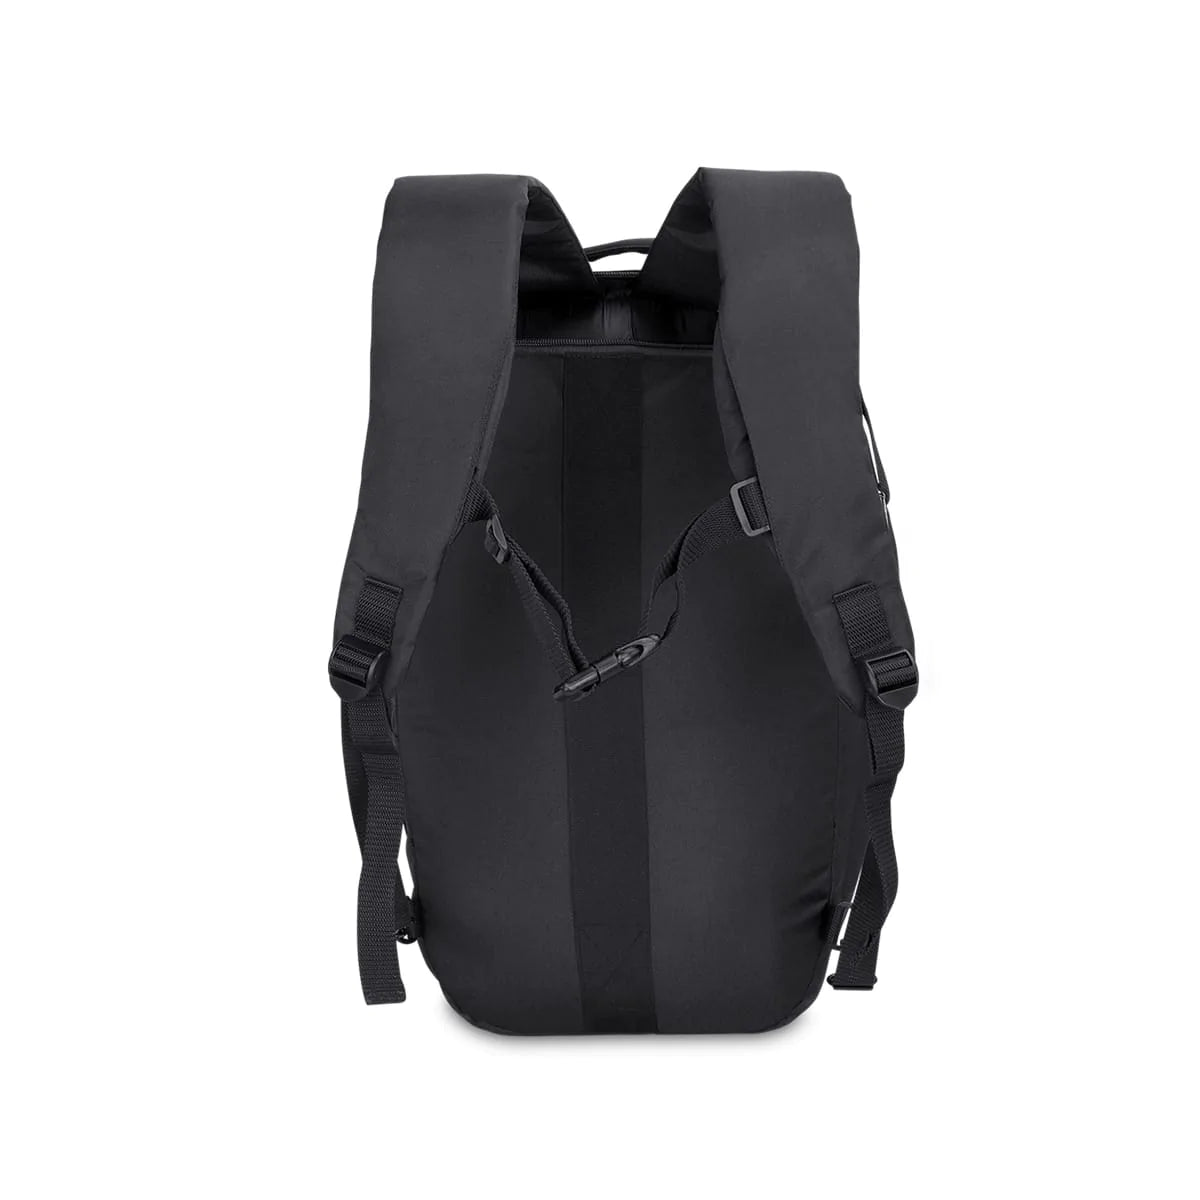 Black | Protecta Proposed Merger Convertible Office Trave Laptop Backpack-3